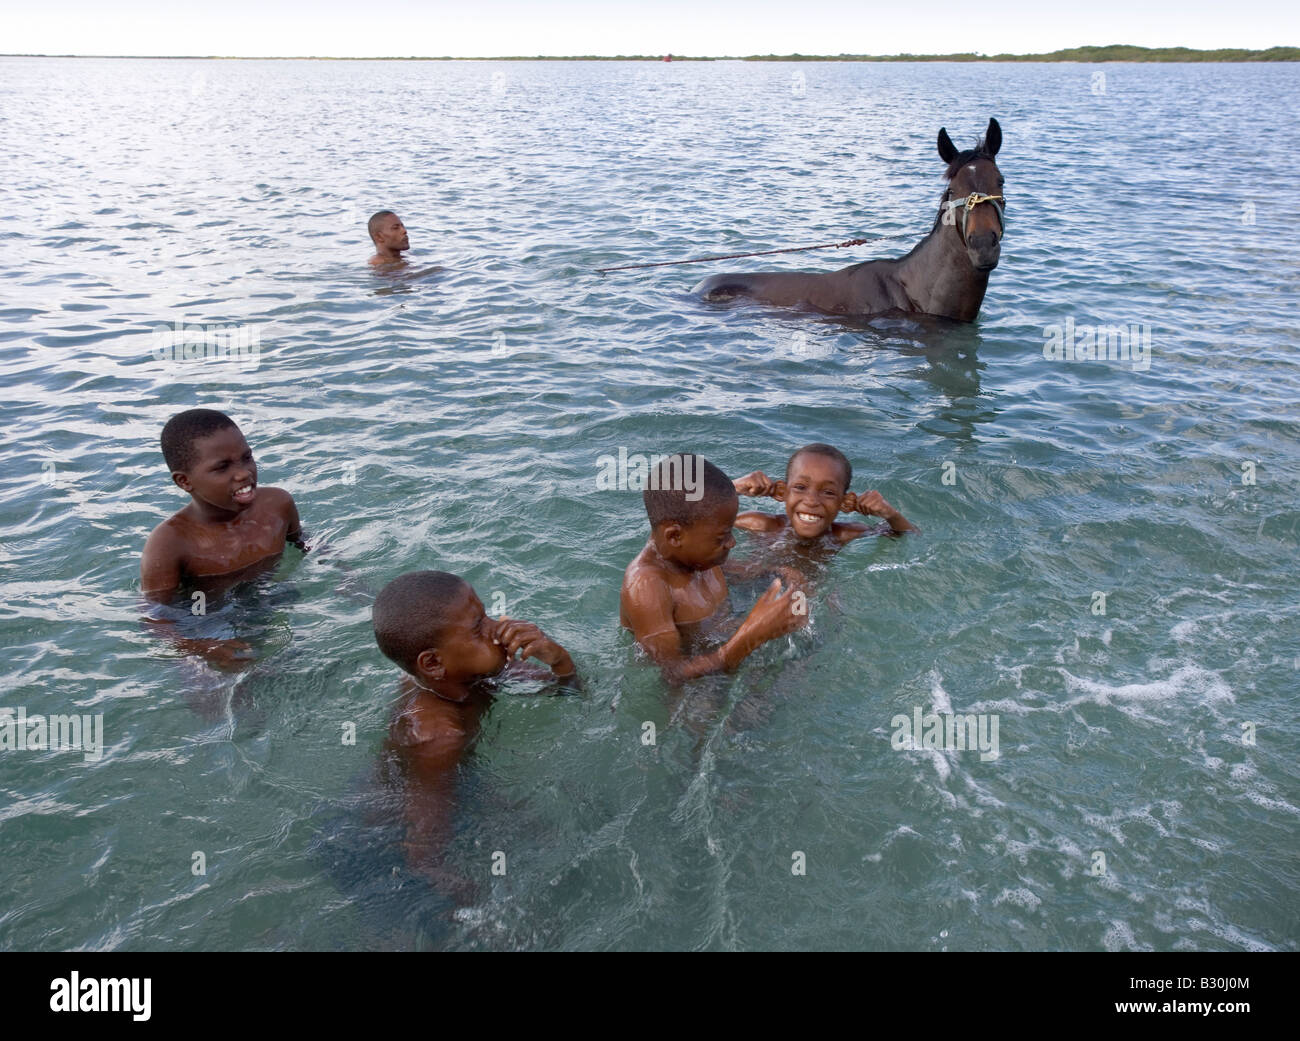 A man swims his race horse in The Lagoon near Codrington Barbuda Kids swimming nearby have seen this before Stock Photo